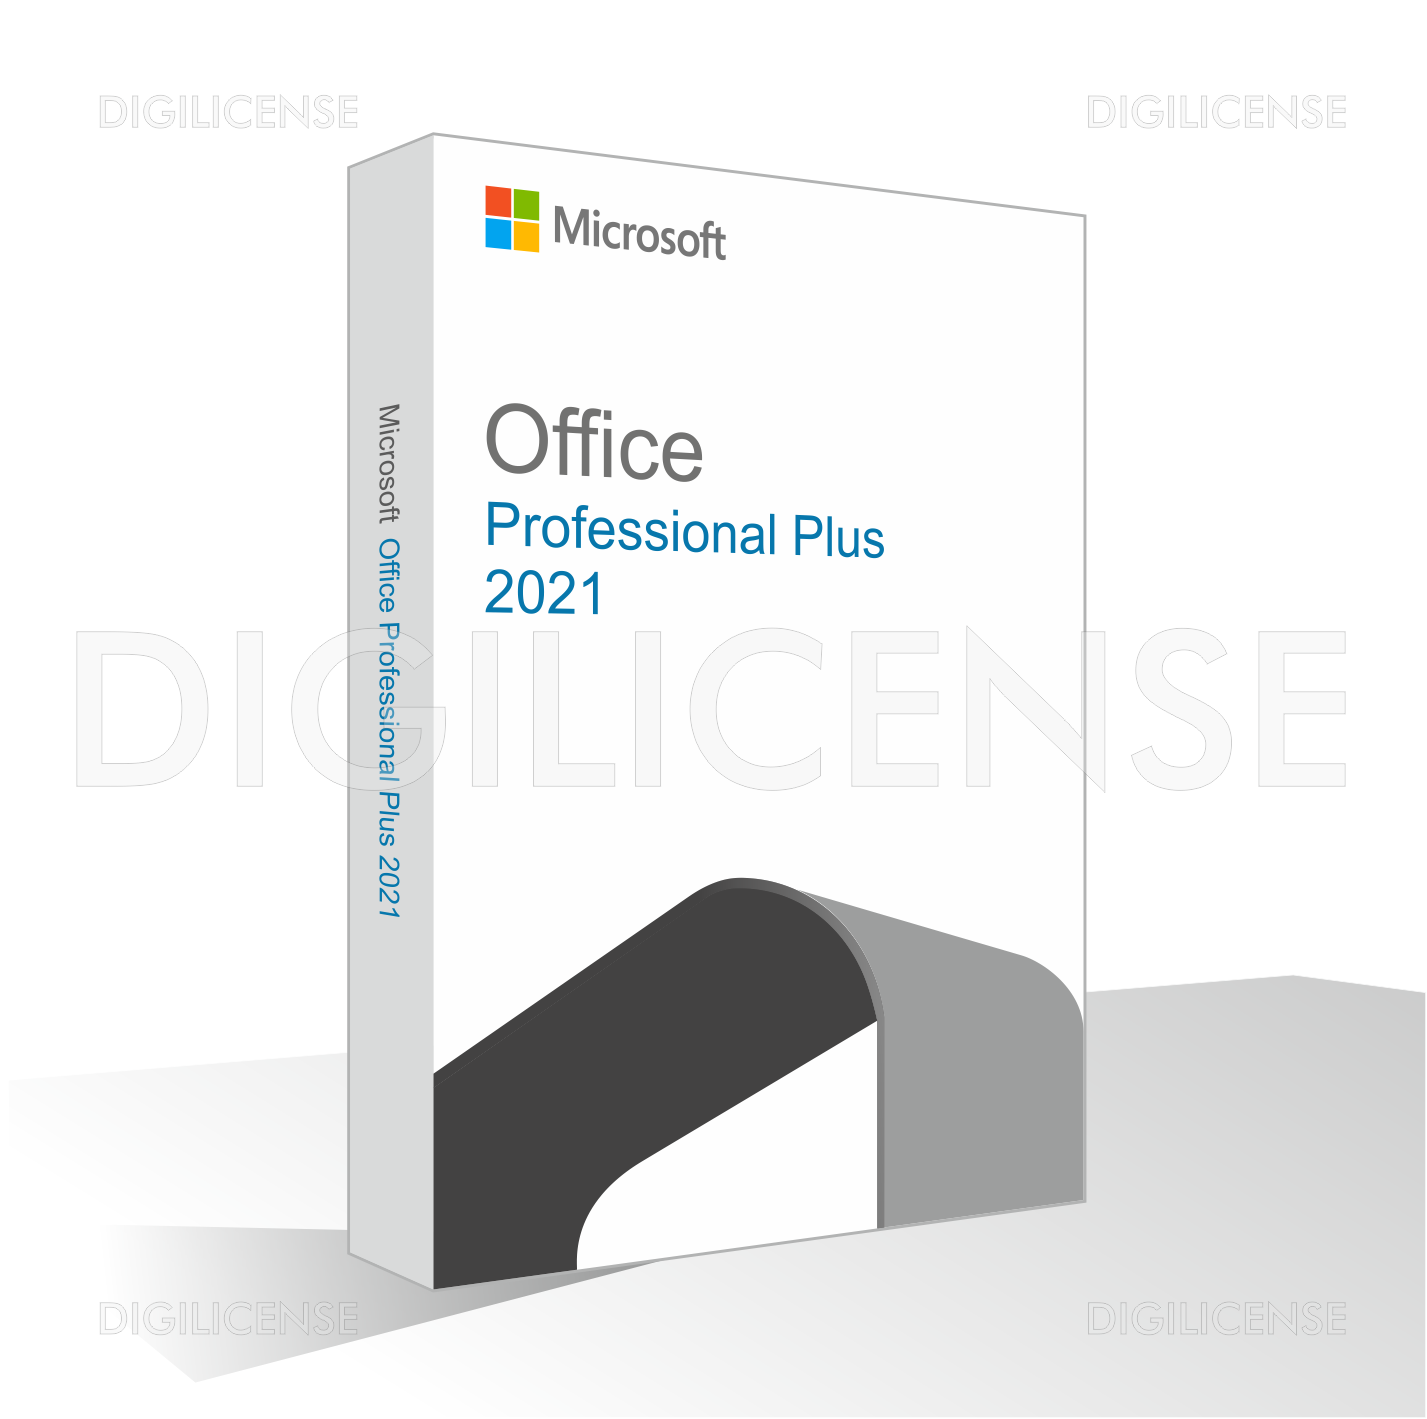 Microsoft Office 2021 Professional Plus 1 device Perpetual license